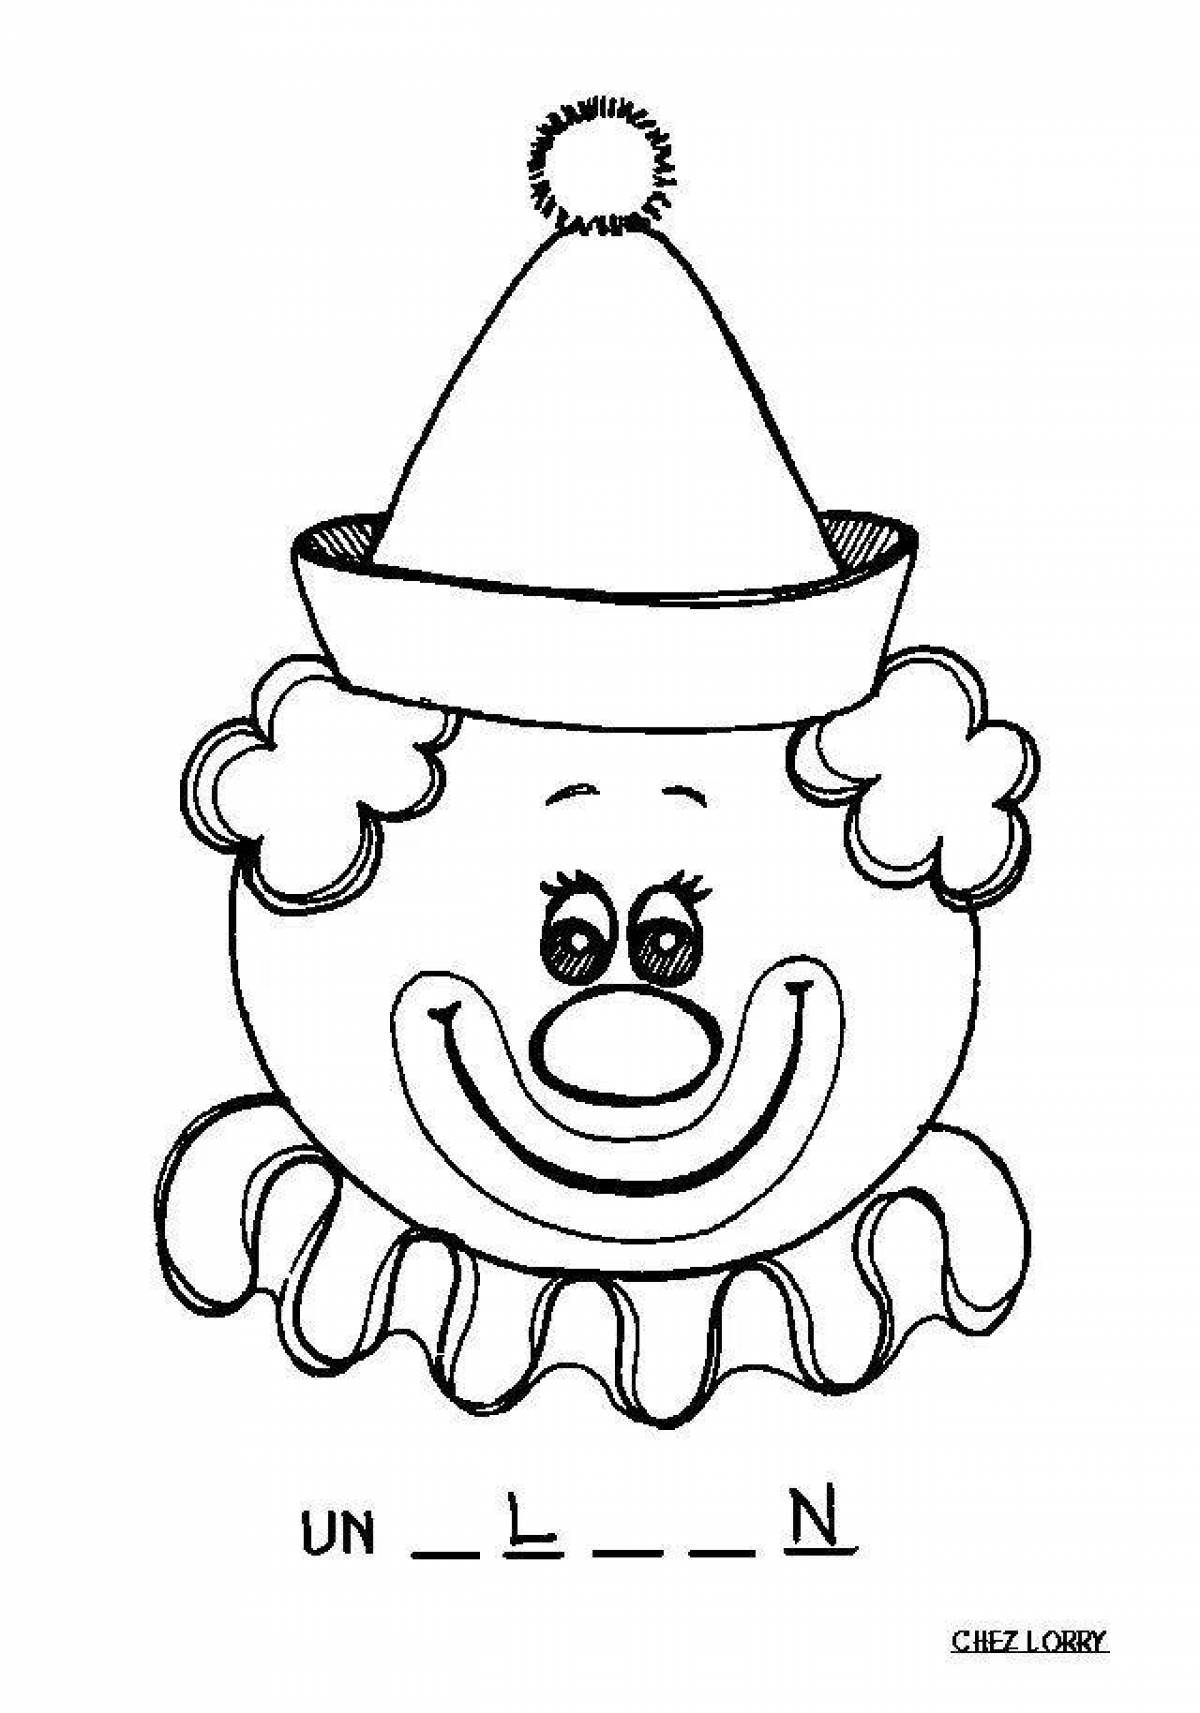 Colorful clown face coloring page